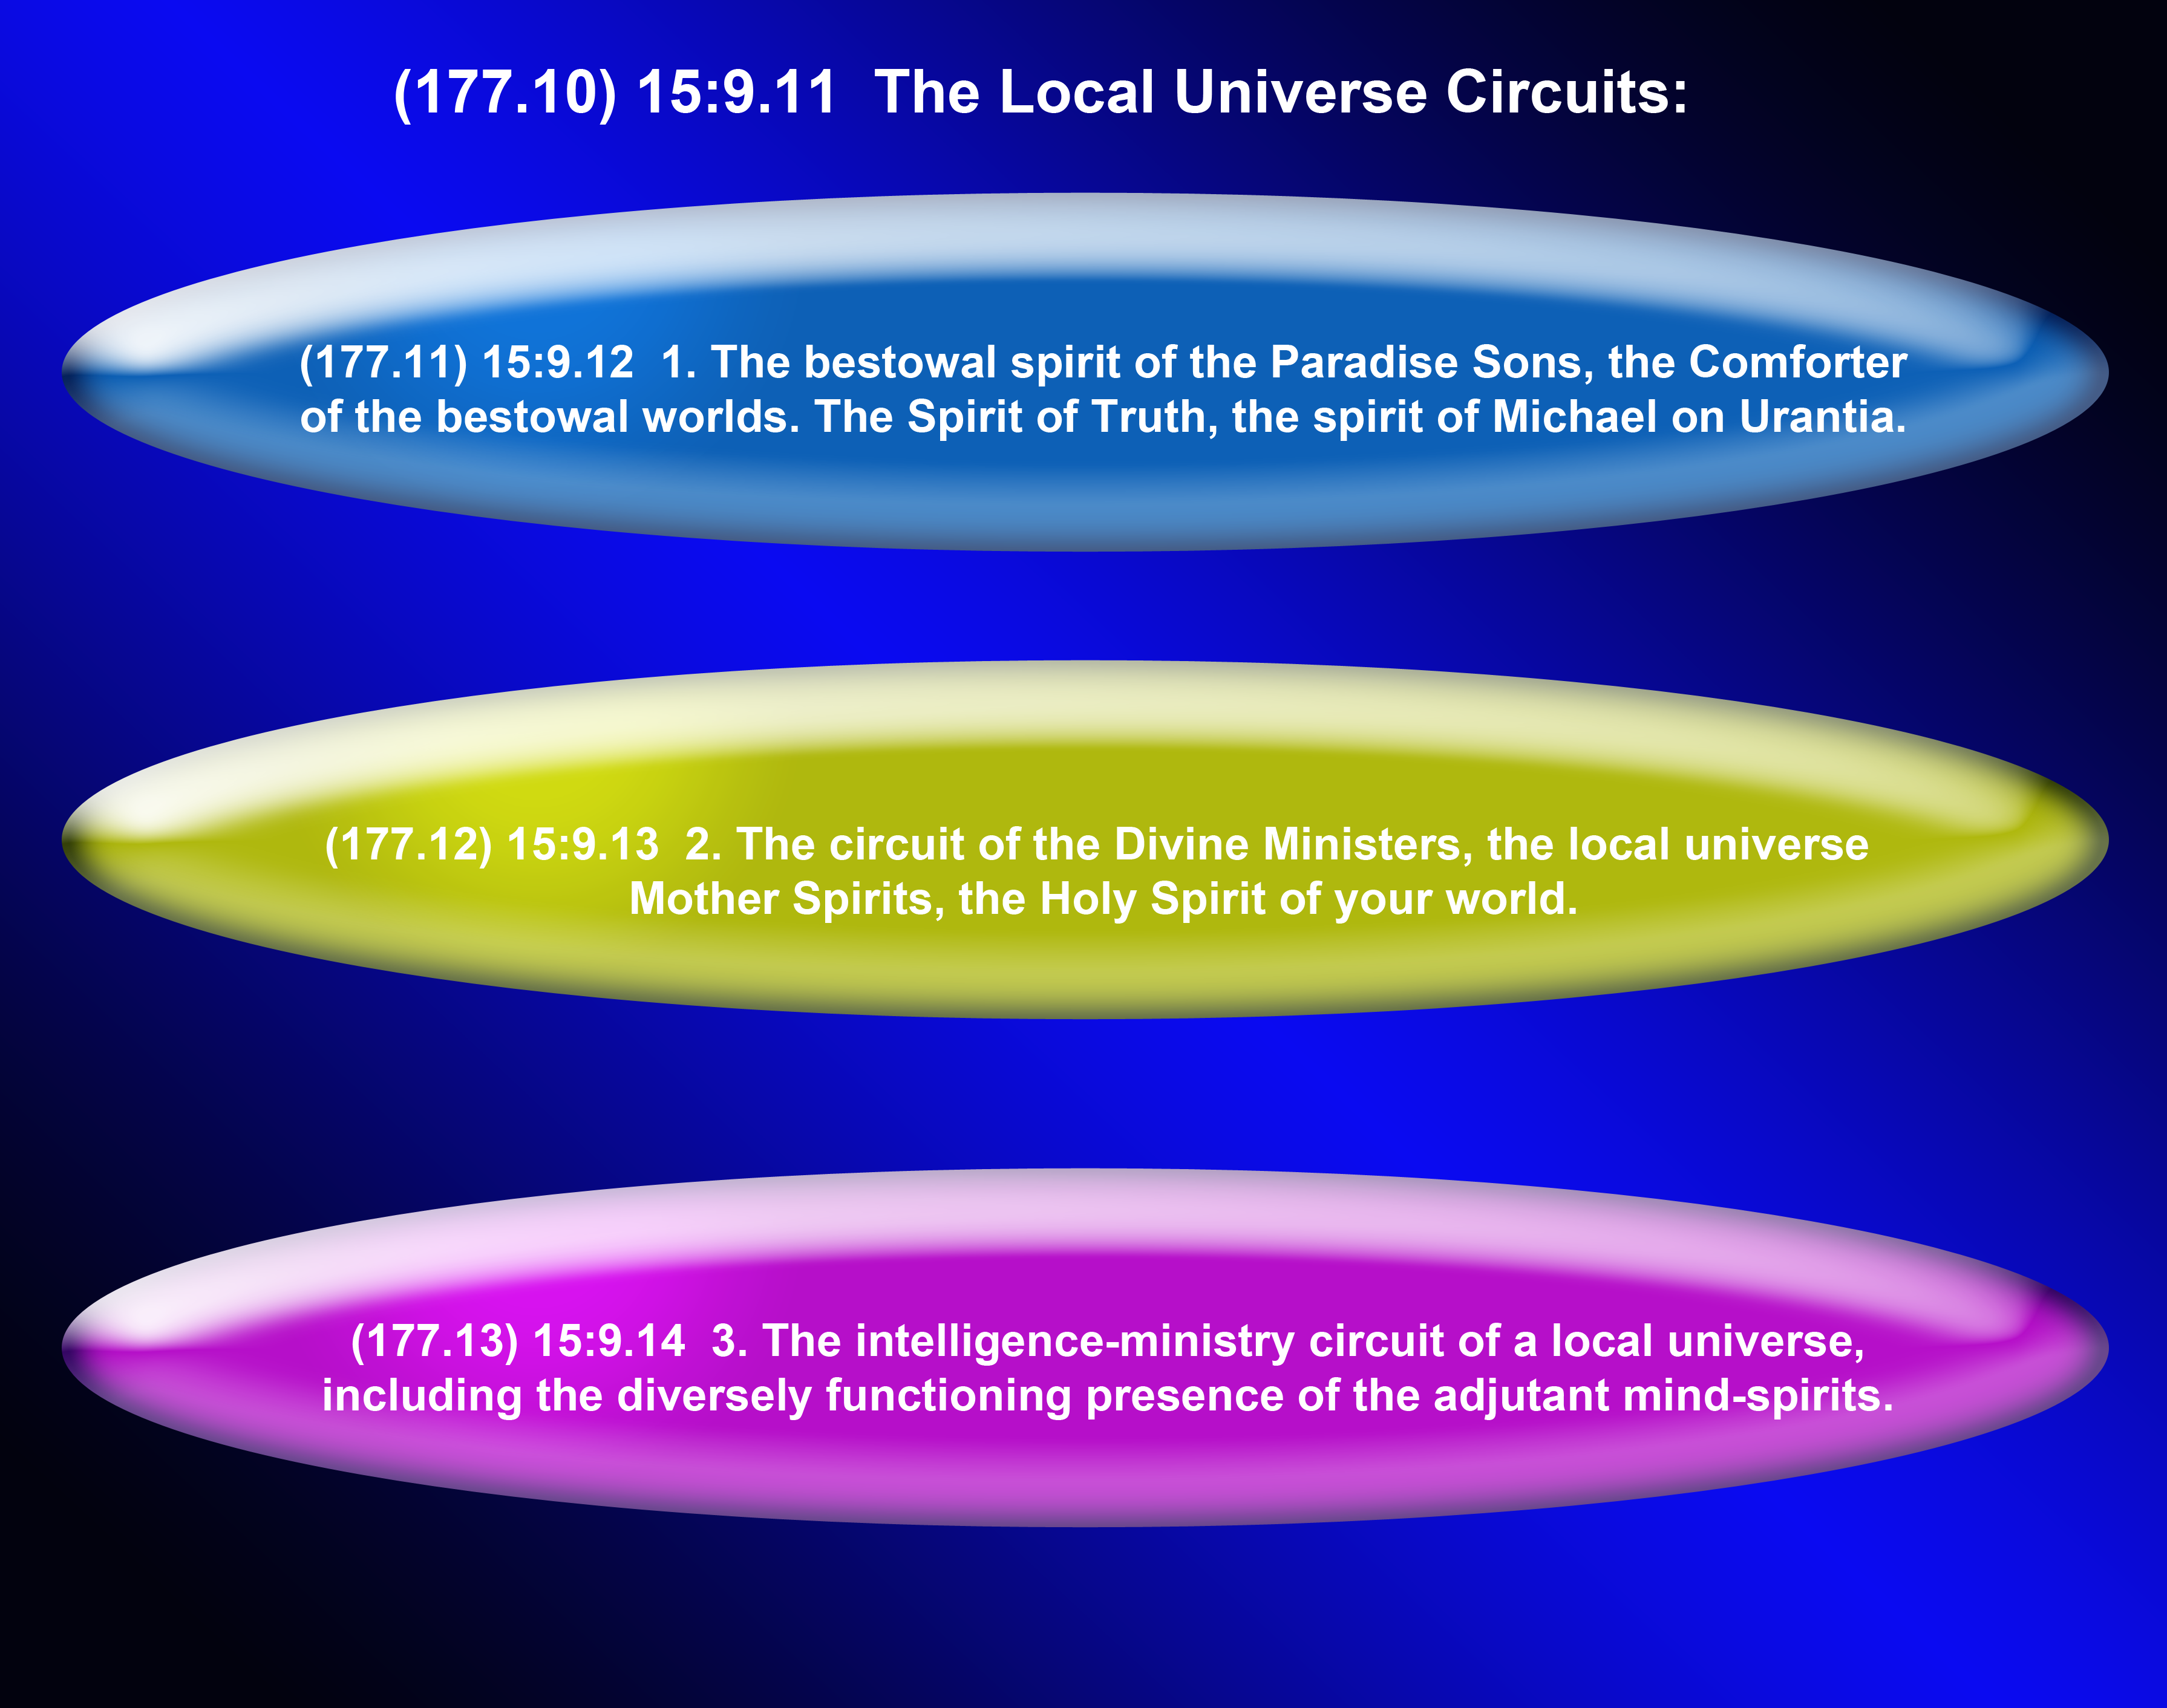 The Local universe circuits